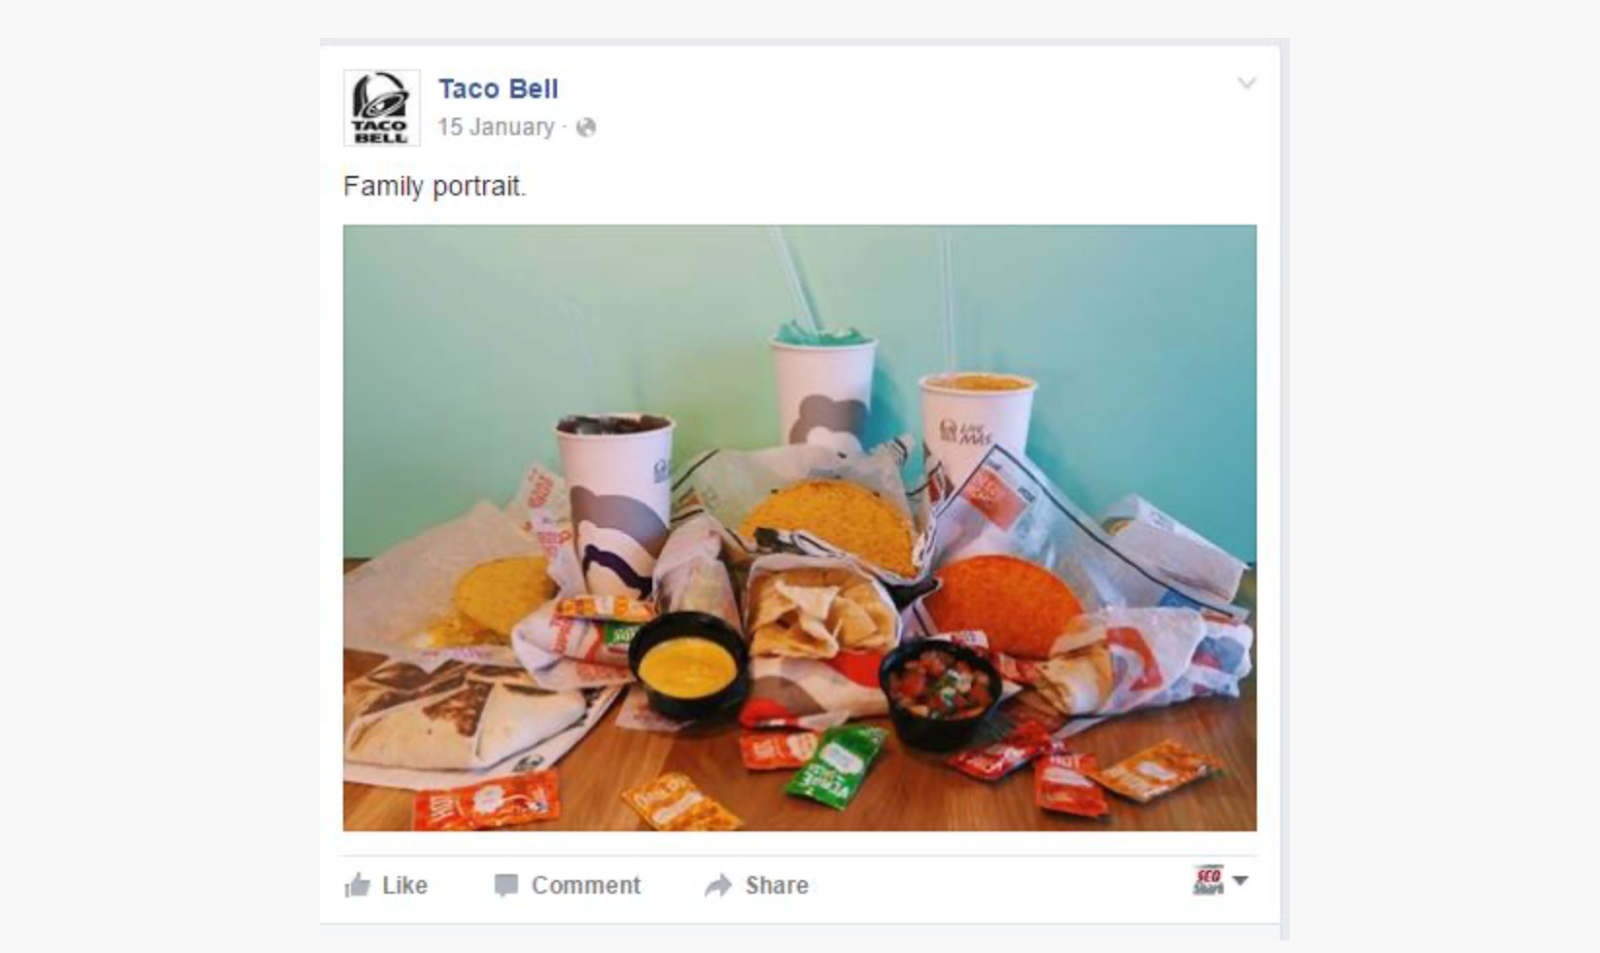 Taco Bell use of humor on social media example 